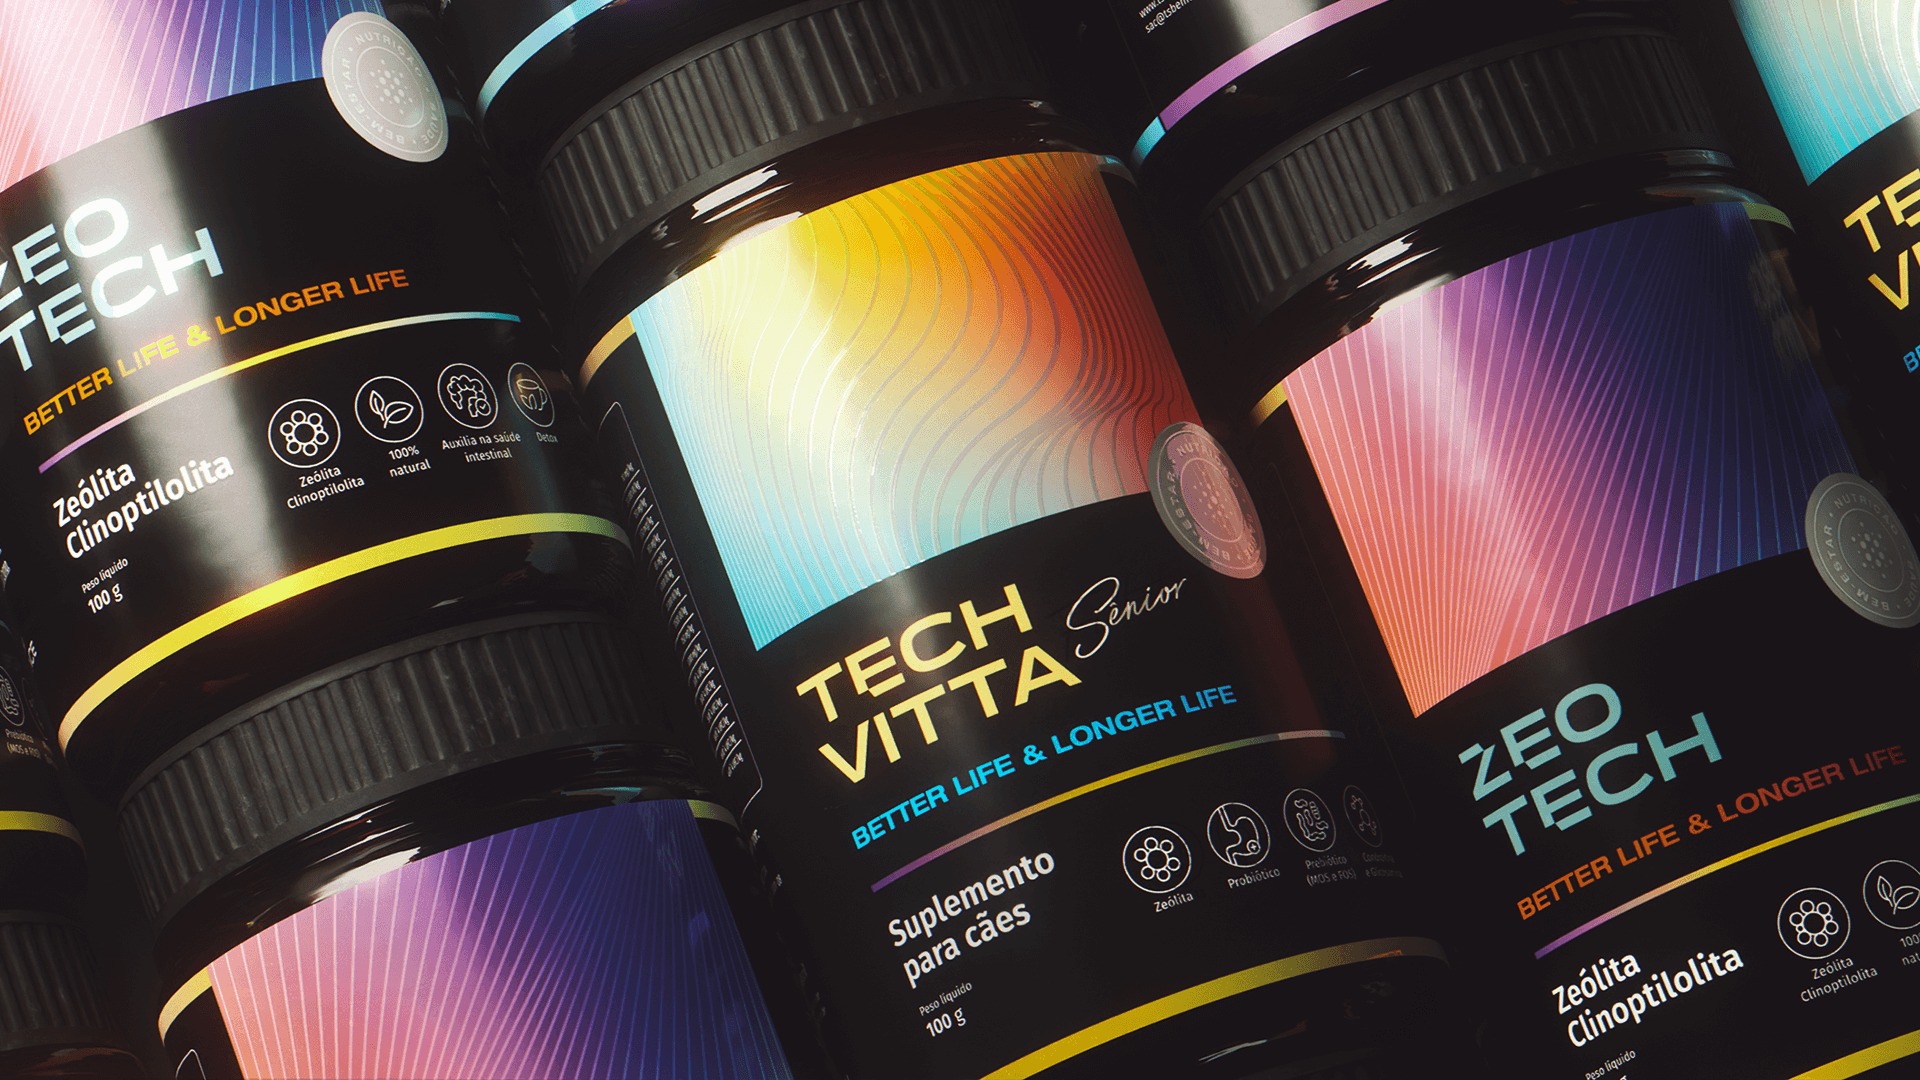 Tech Science Identity and Packaging Design by Estúdio Kuumba